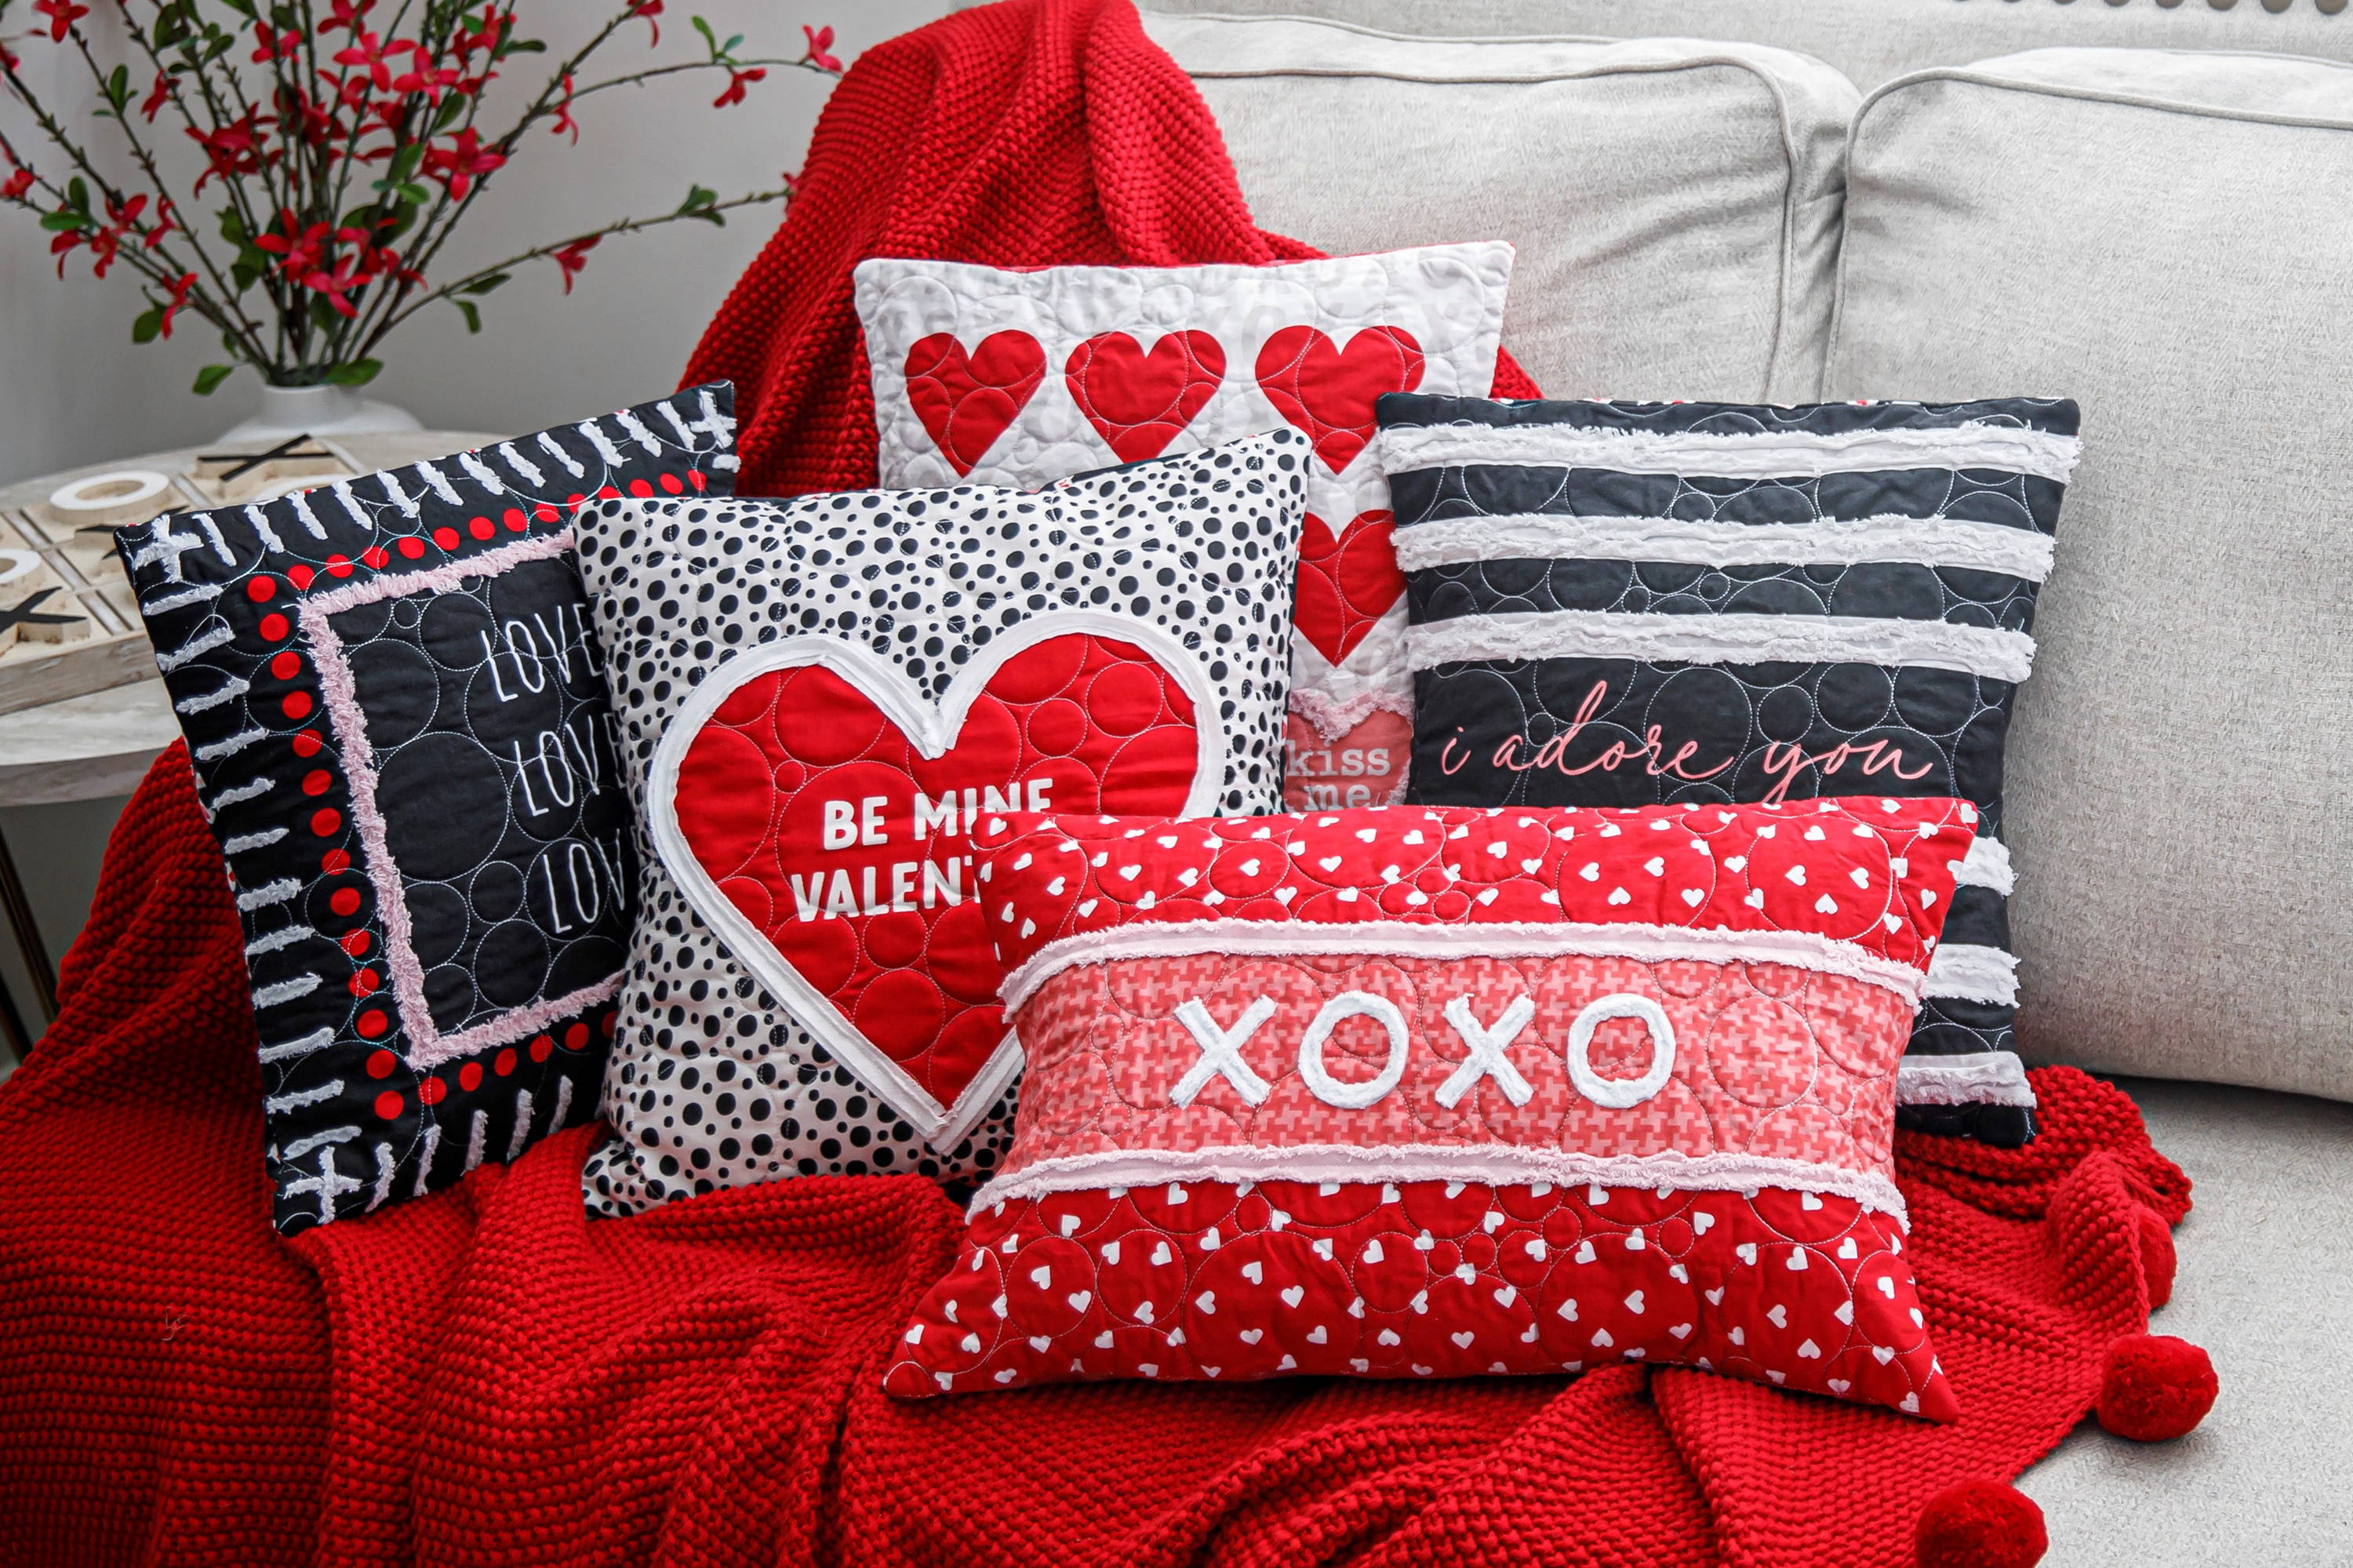 XOXO pillow panel Valentine's day sewing project for gifts or decor